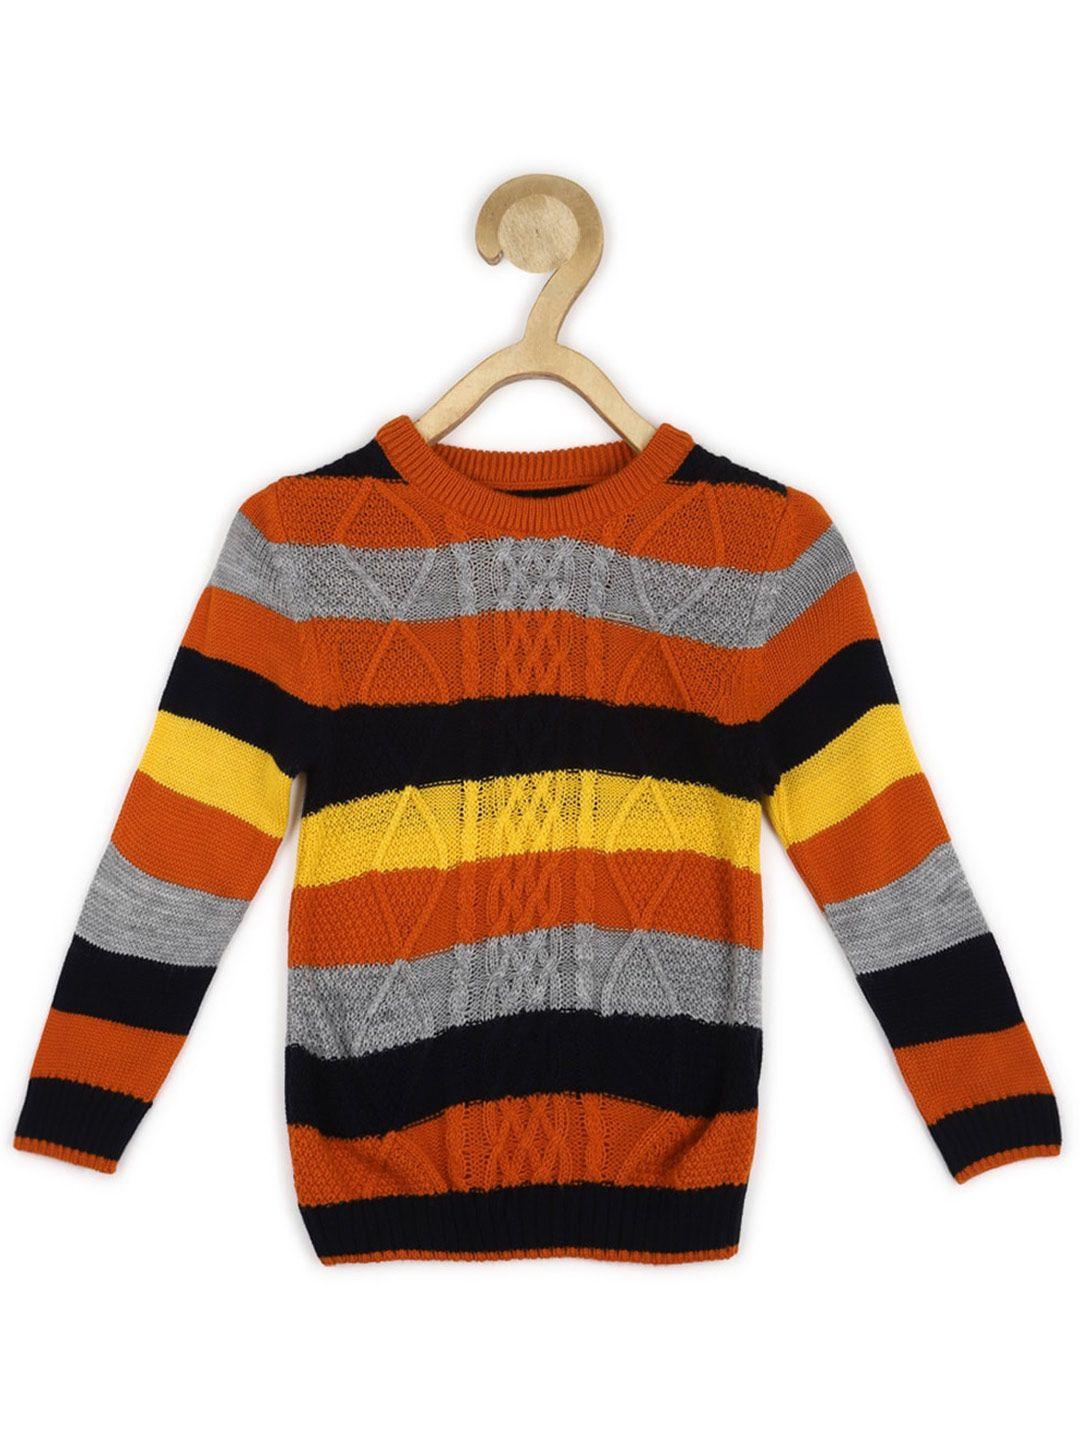 allen-solly-junior-boys-striped-round-neck-long-sleeve-acrylic-pullover-sweater